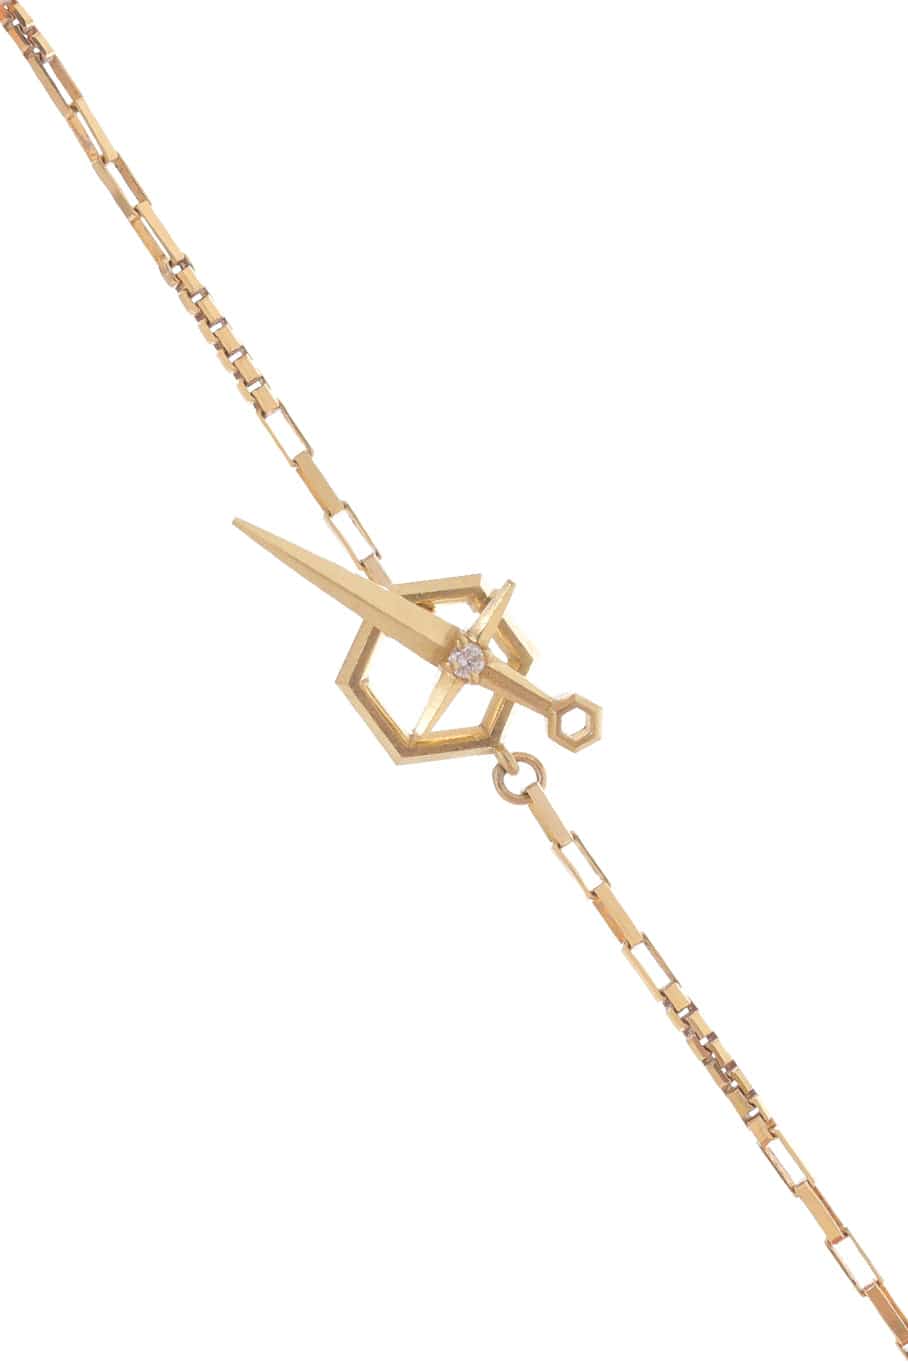 STEPHANIE ANDERS XO-'Eleven Eleven' Necklace-YELLOW GOLD